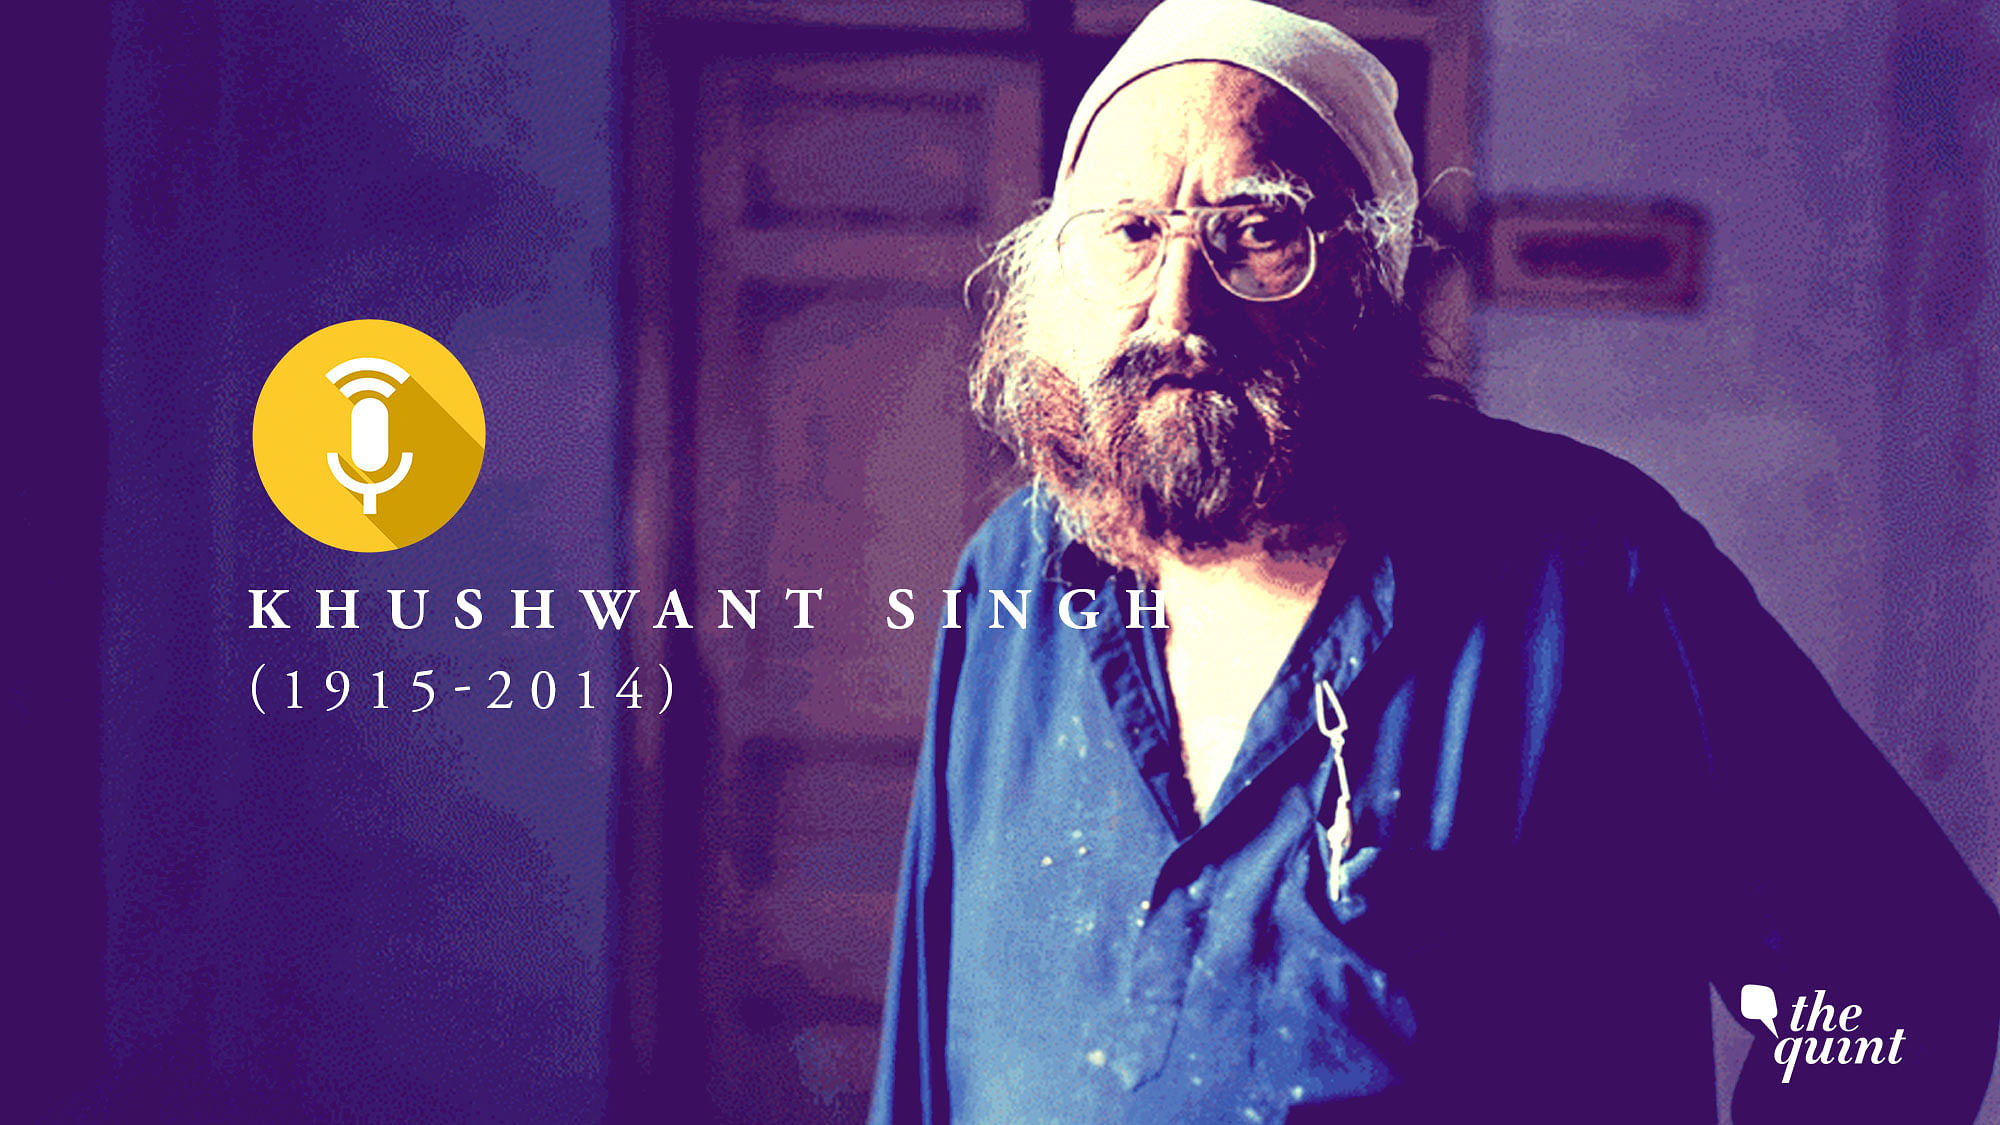 Khushwant Singh was born in Pakistan’s Punjab, in 1915. Since there were no birth records at the time, his exact date of birth has been disputed. 